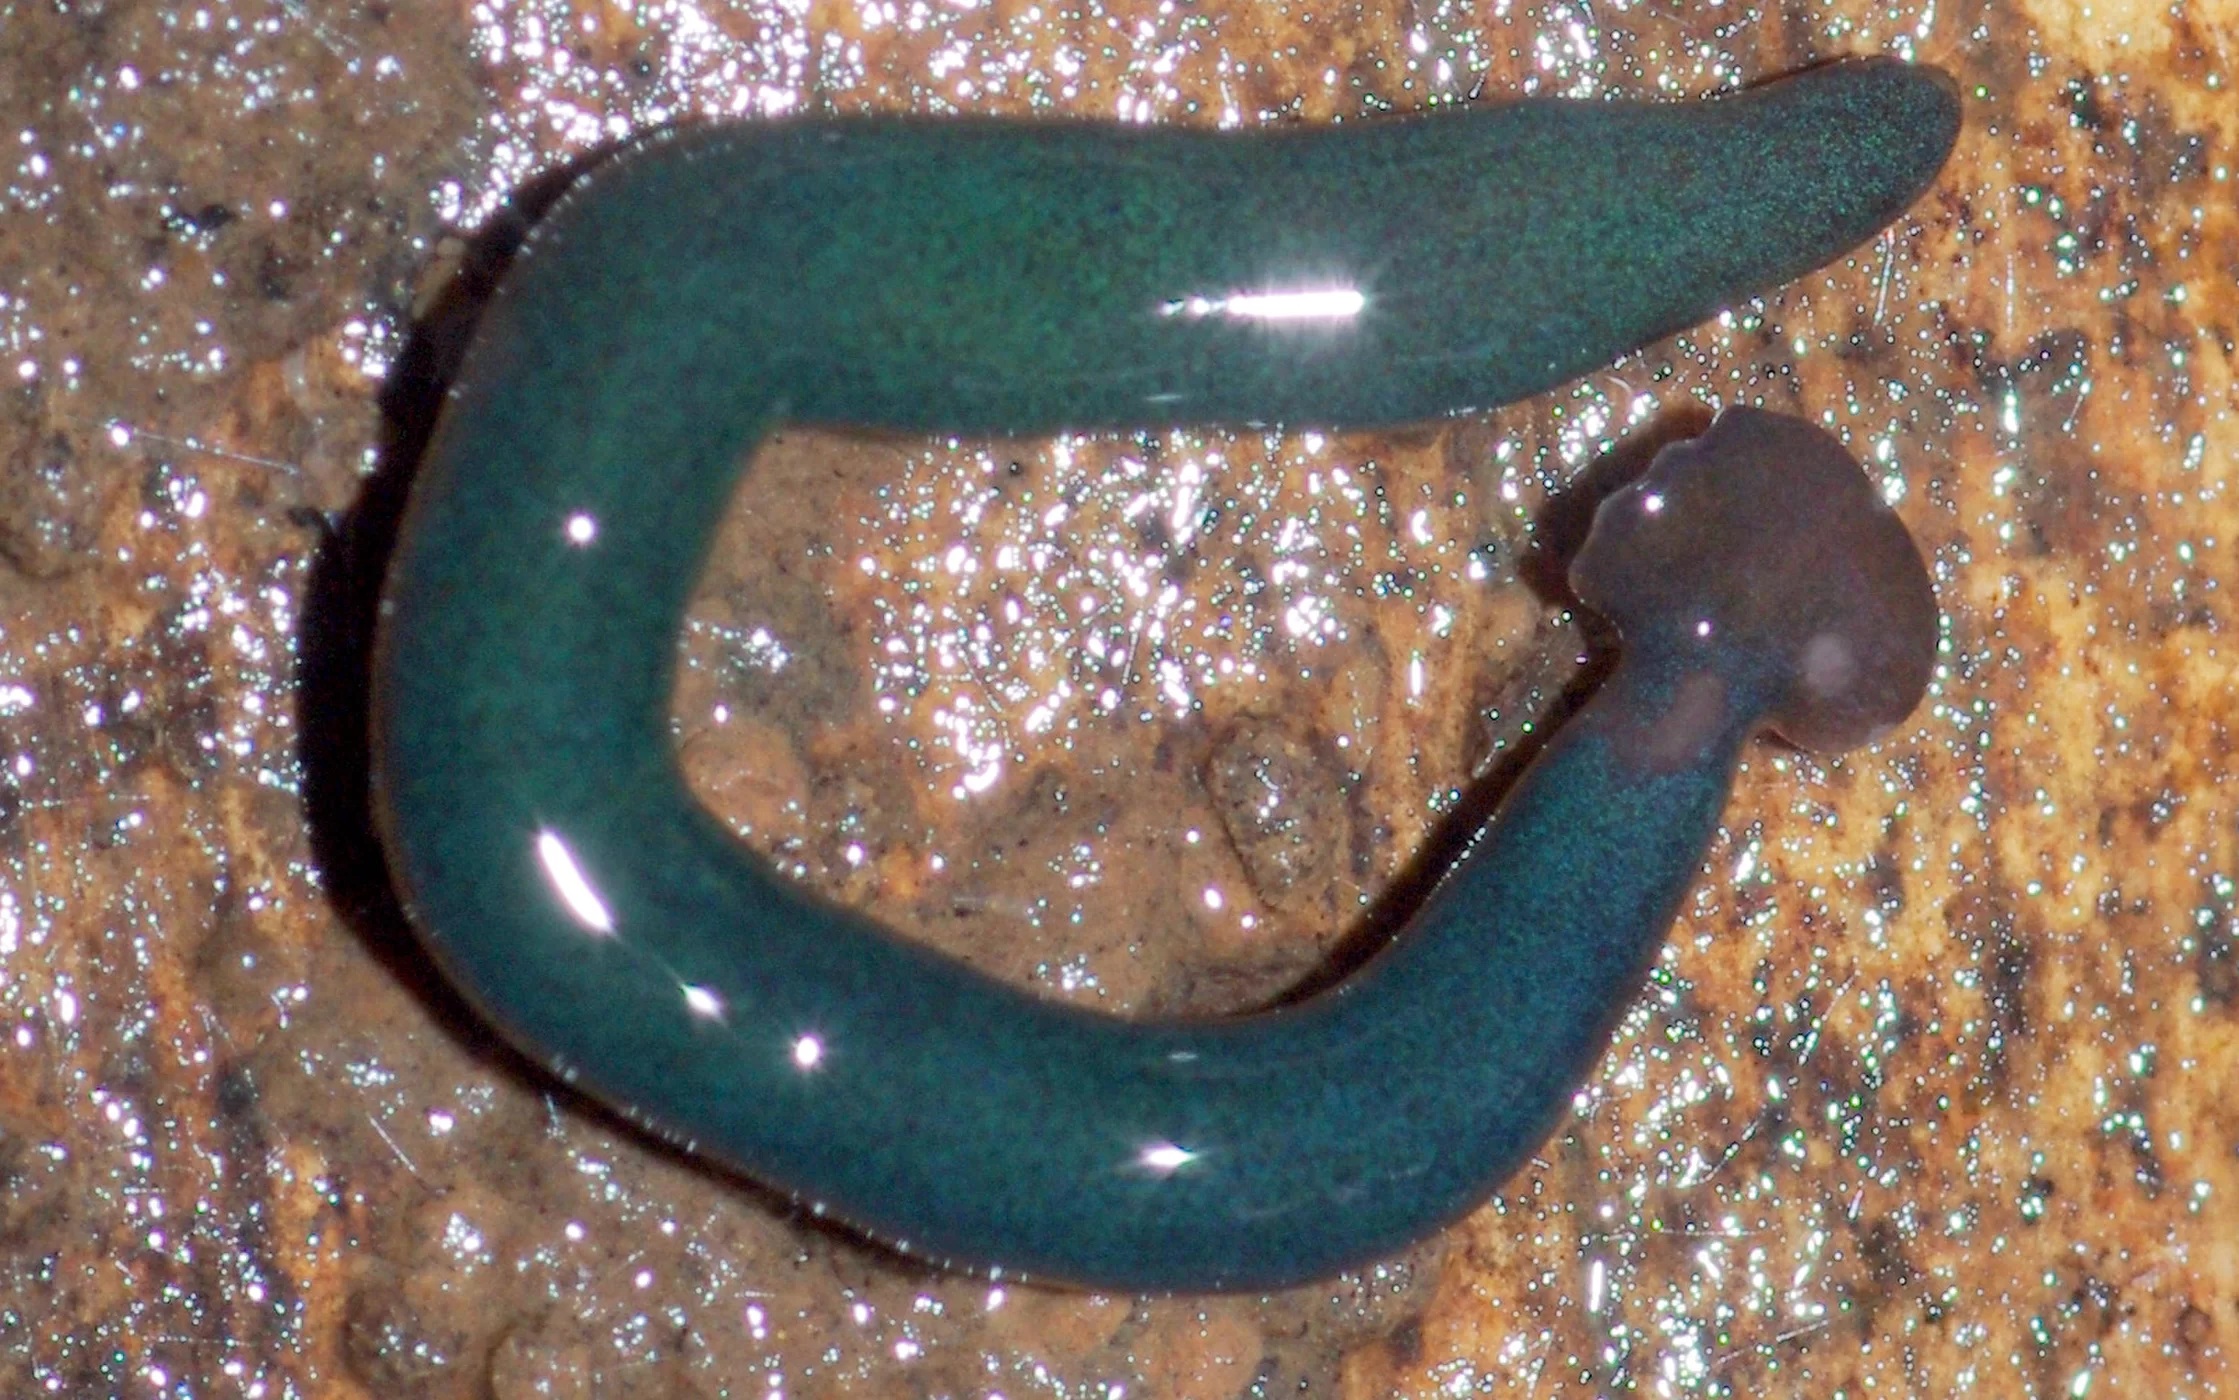 giant hammerhead flatworm - Credit: Laurent Charles, CC BY 4.0